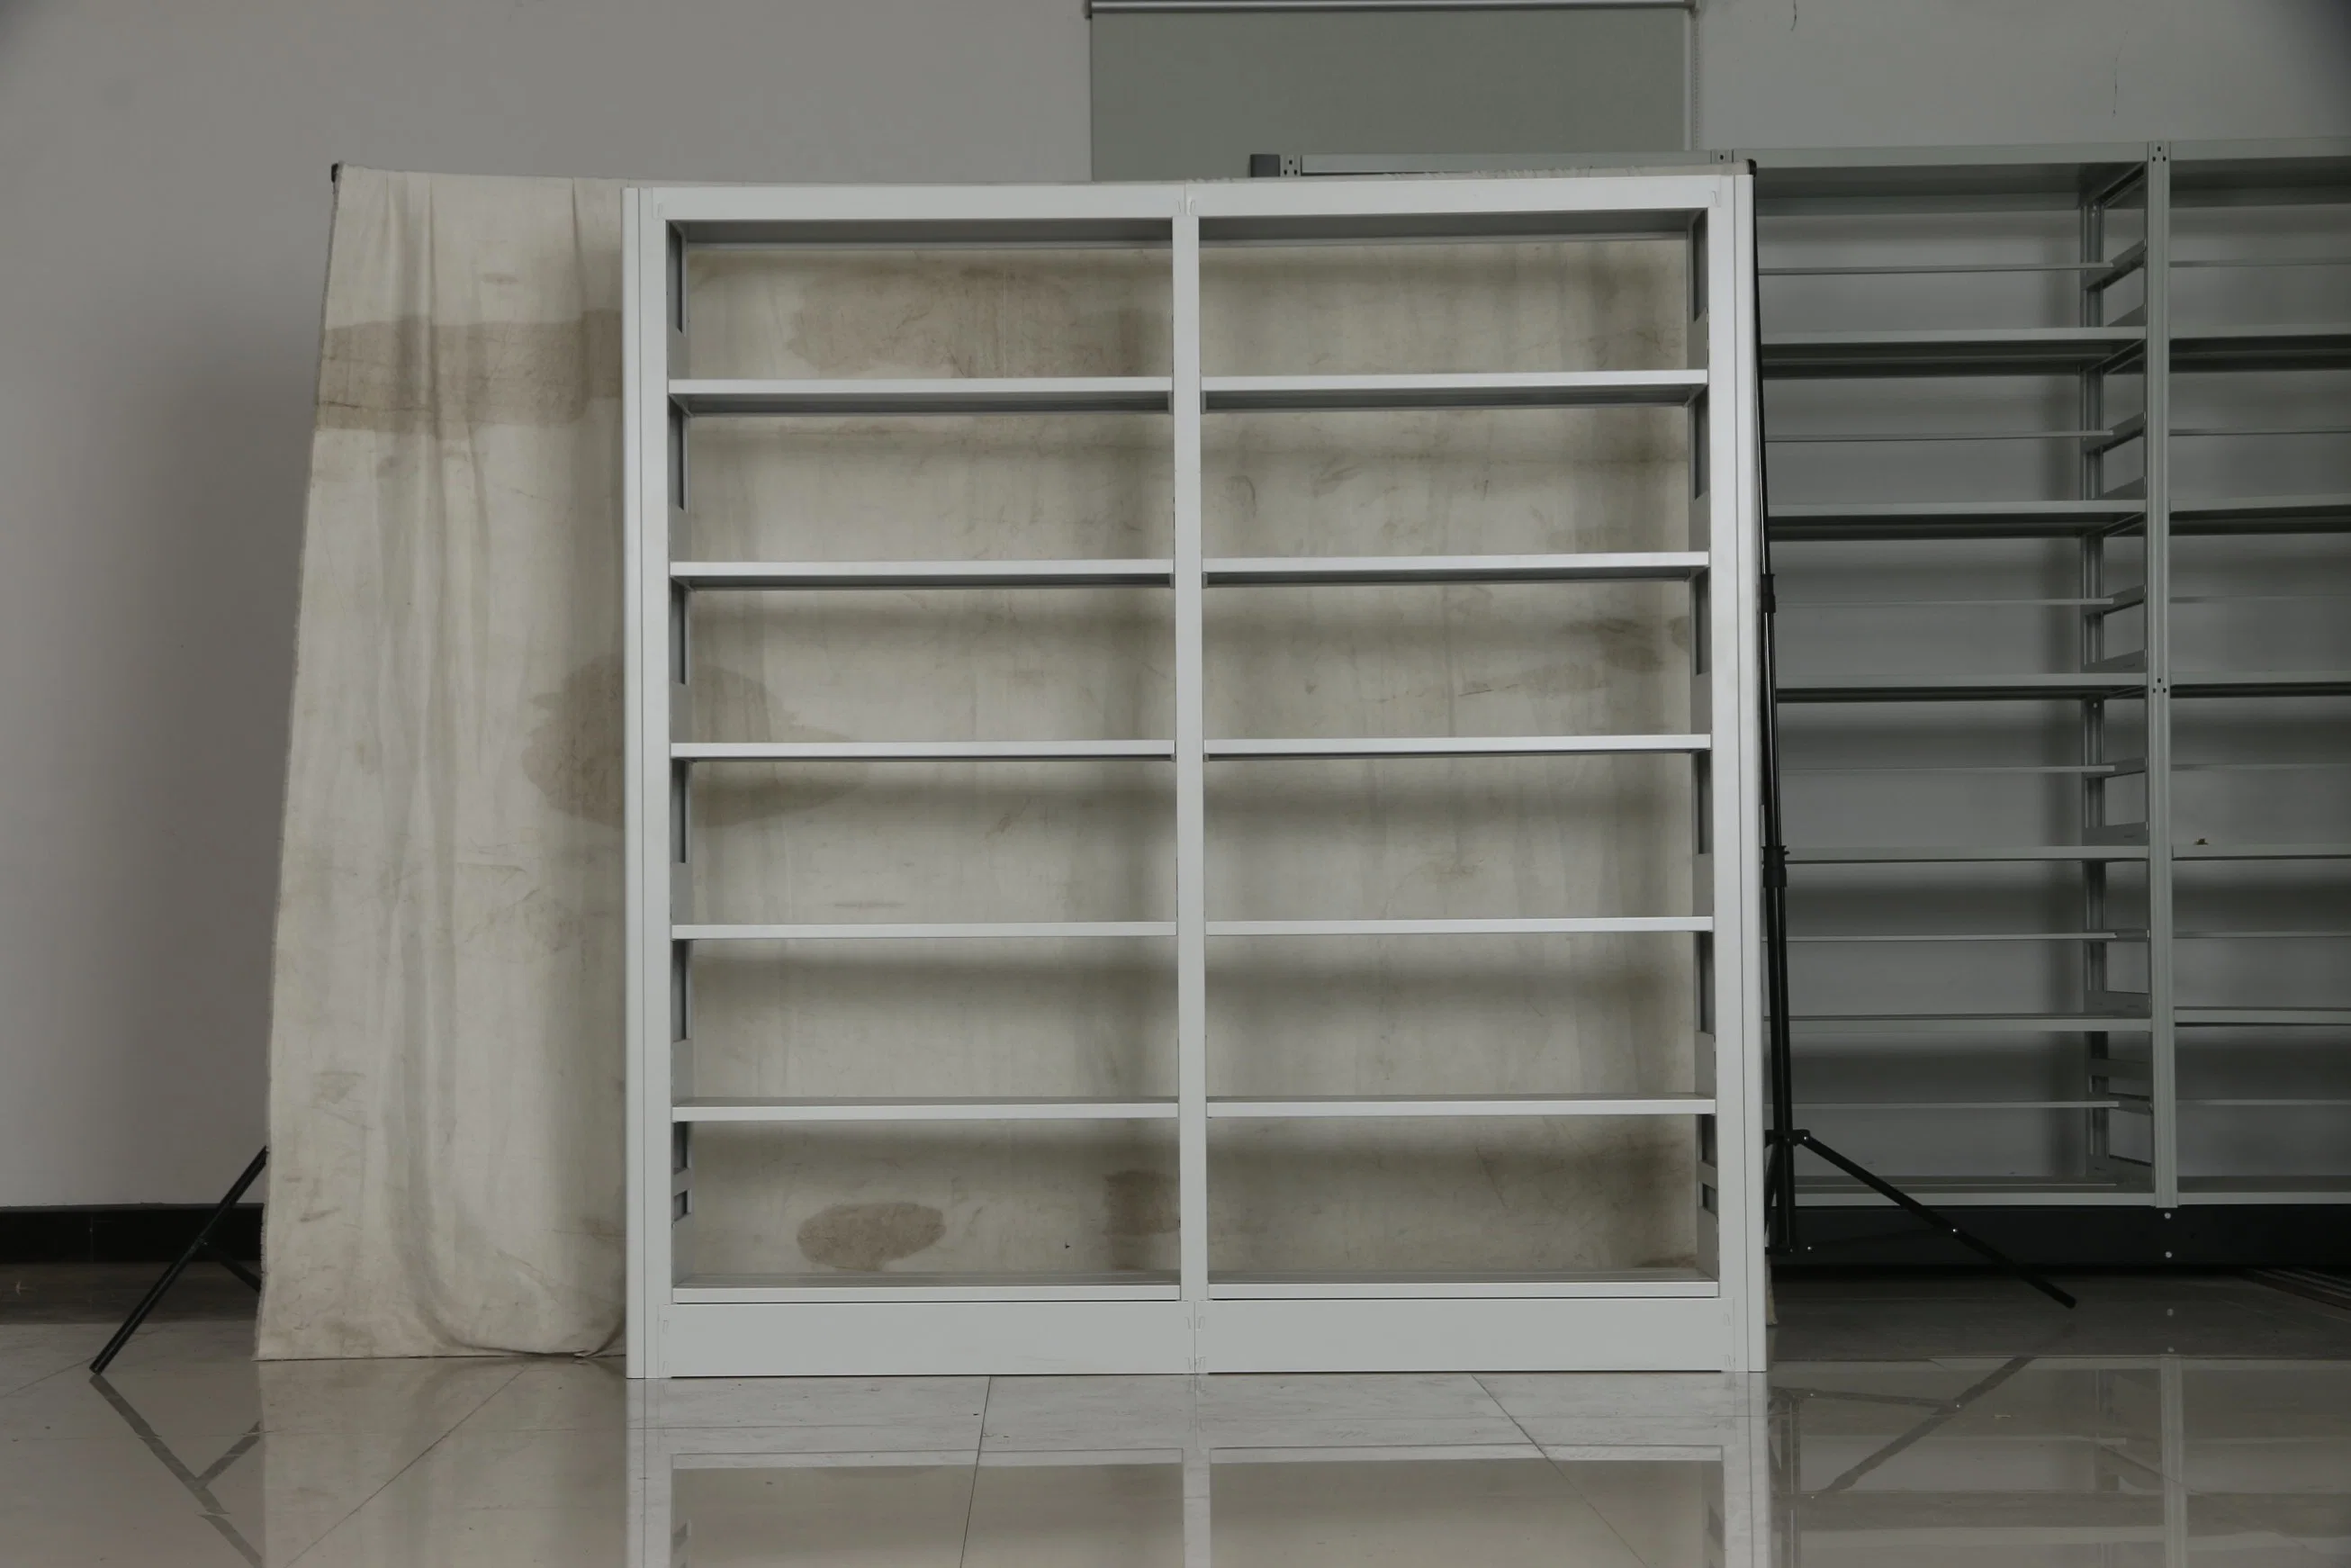 Library Double Sided Bookcase Furniture Metal Multi-Layer Book Shelf Office Bookshelf Wood Bookcases